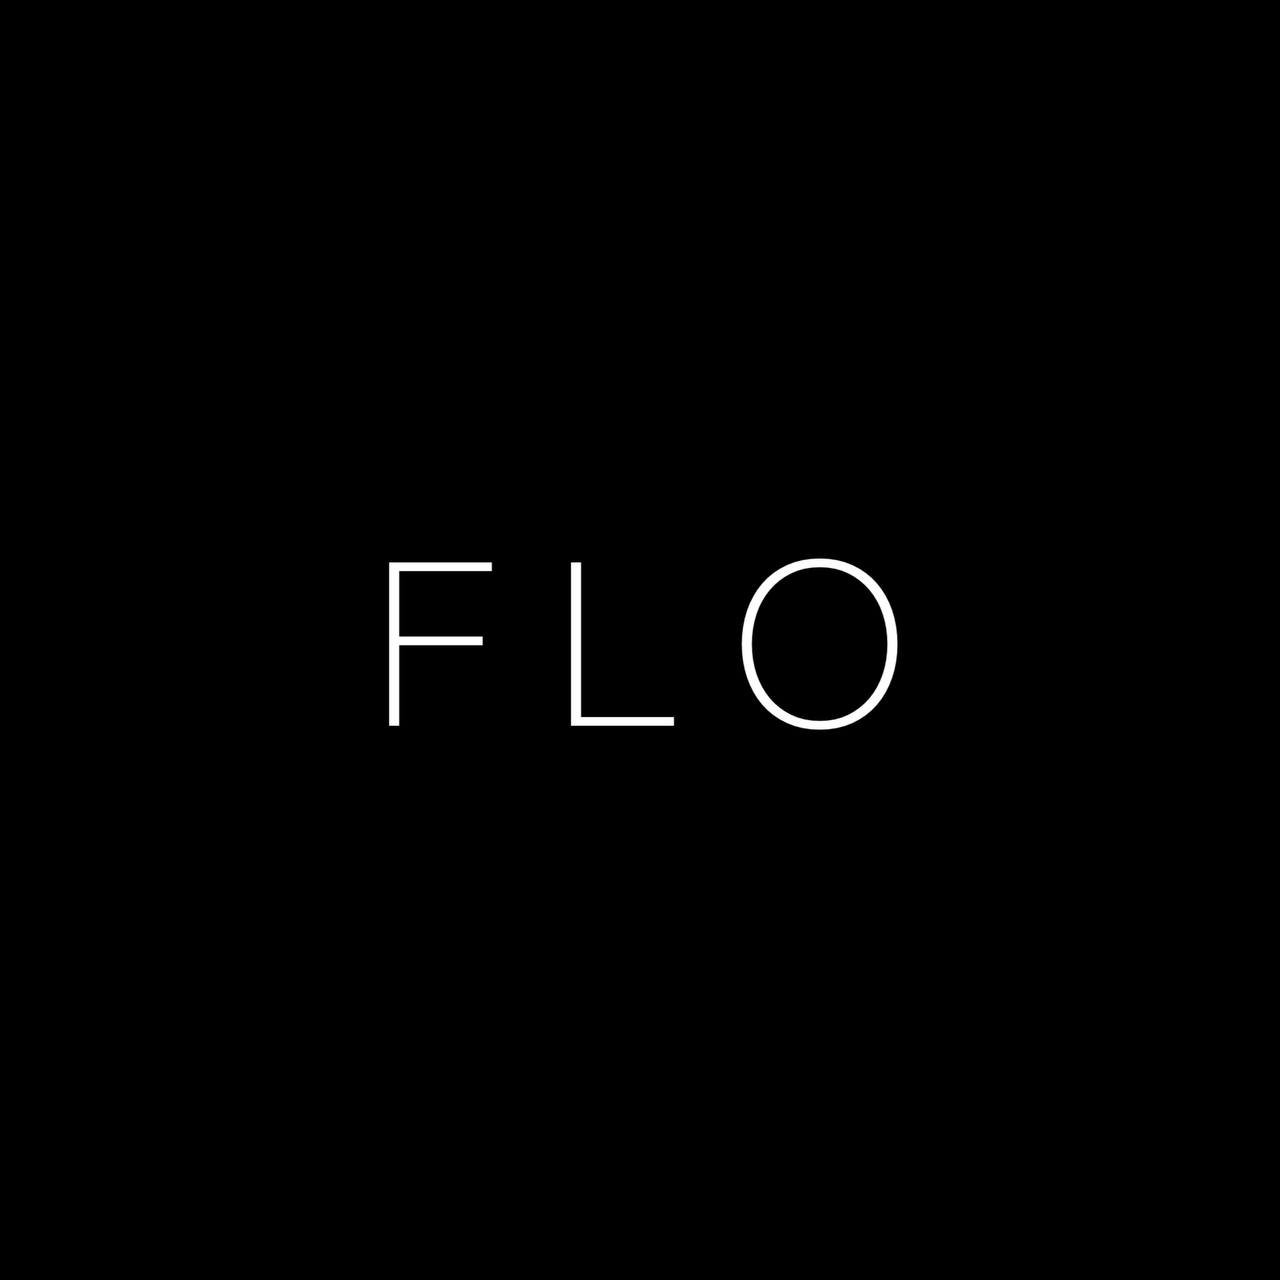 The Flo Size charts